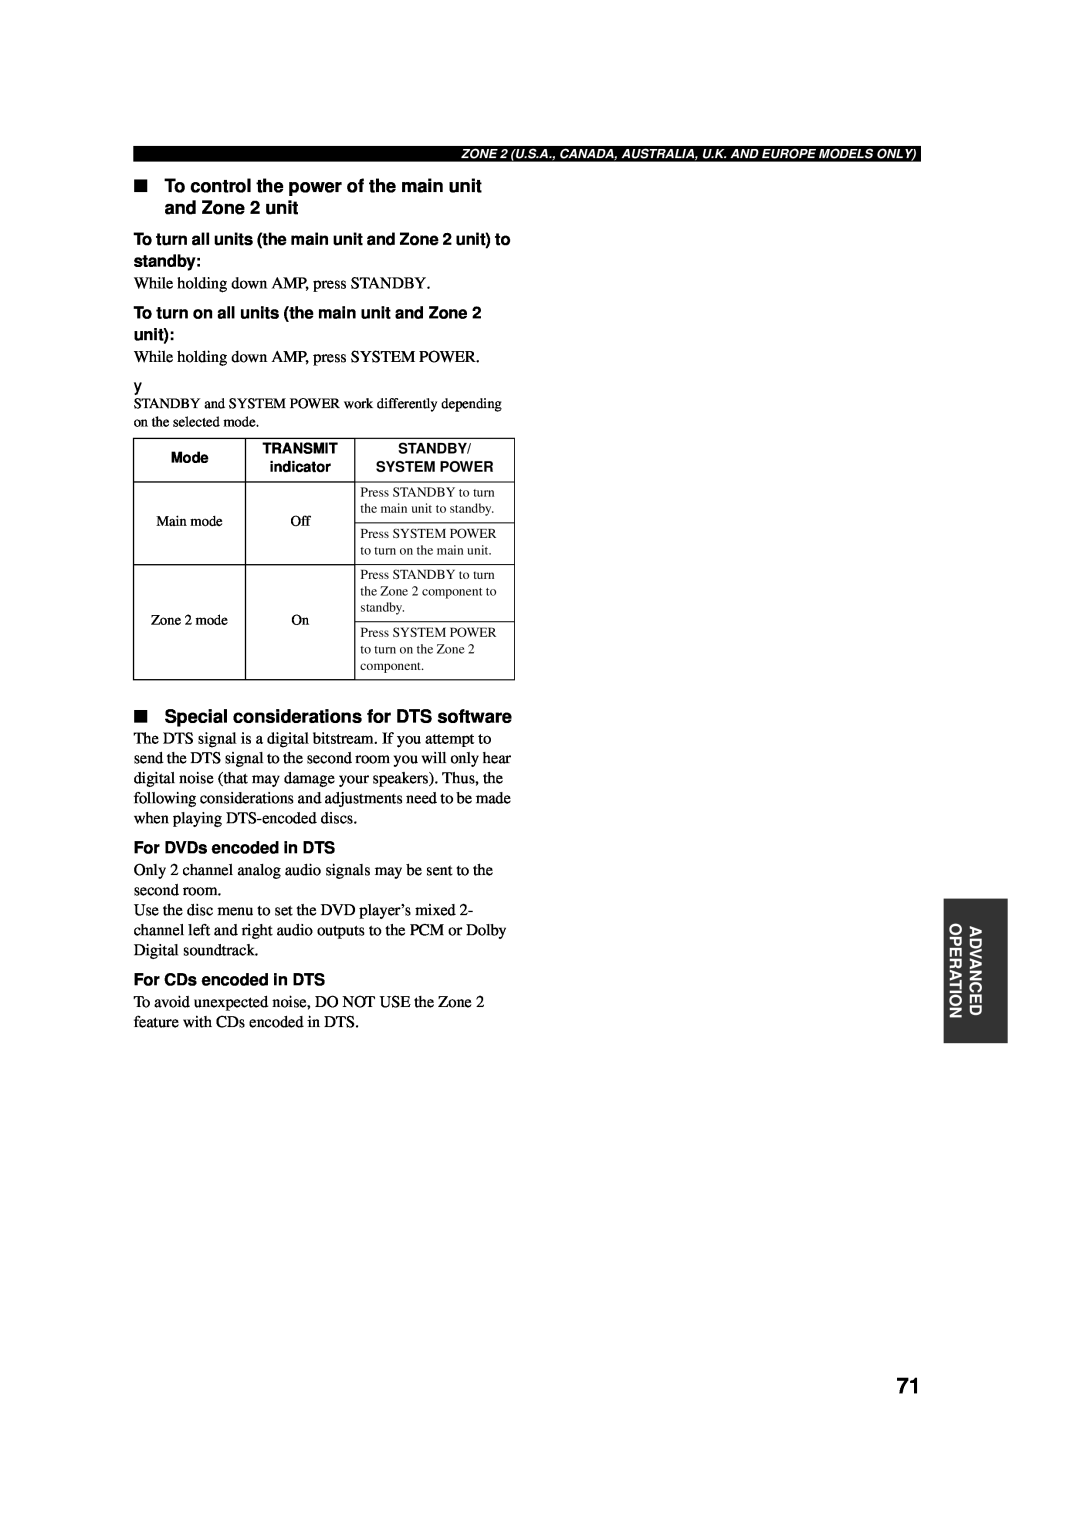 Yamaha AV Receiver owner manual Special considerations for DTS software, For DVDs encoded in DTS, For CDs encoded in DTS 